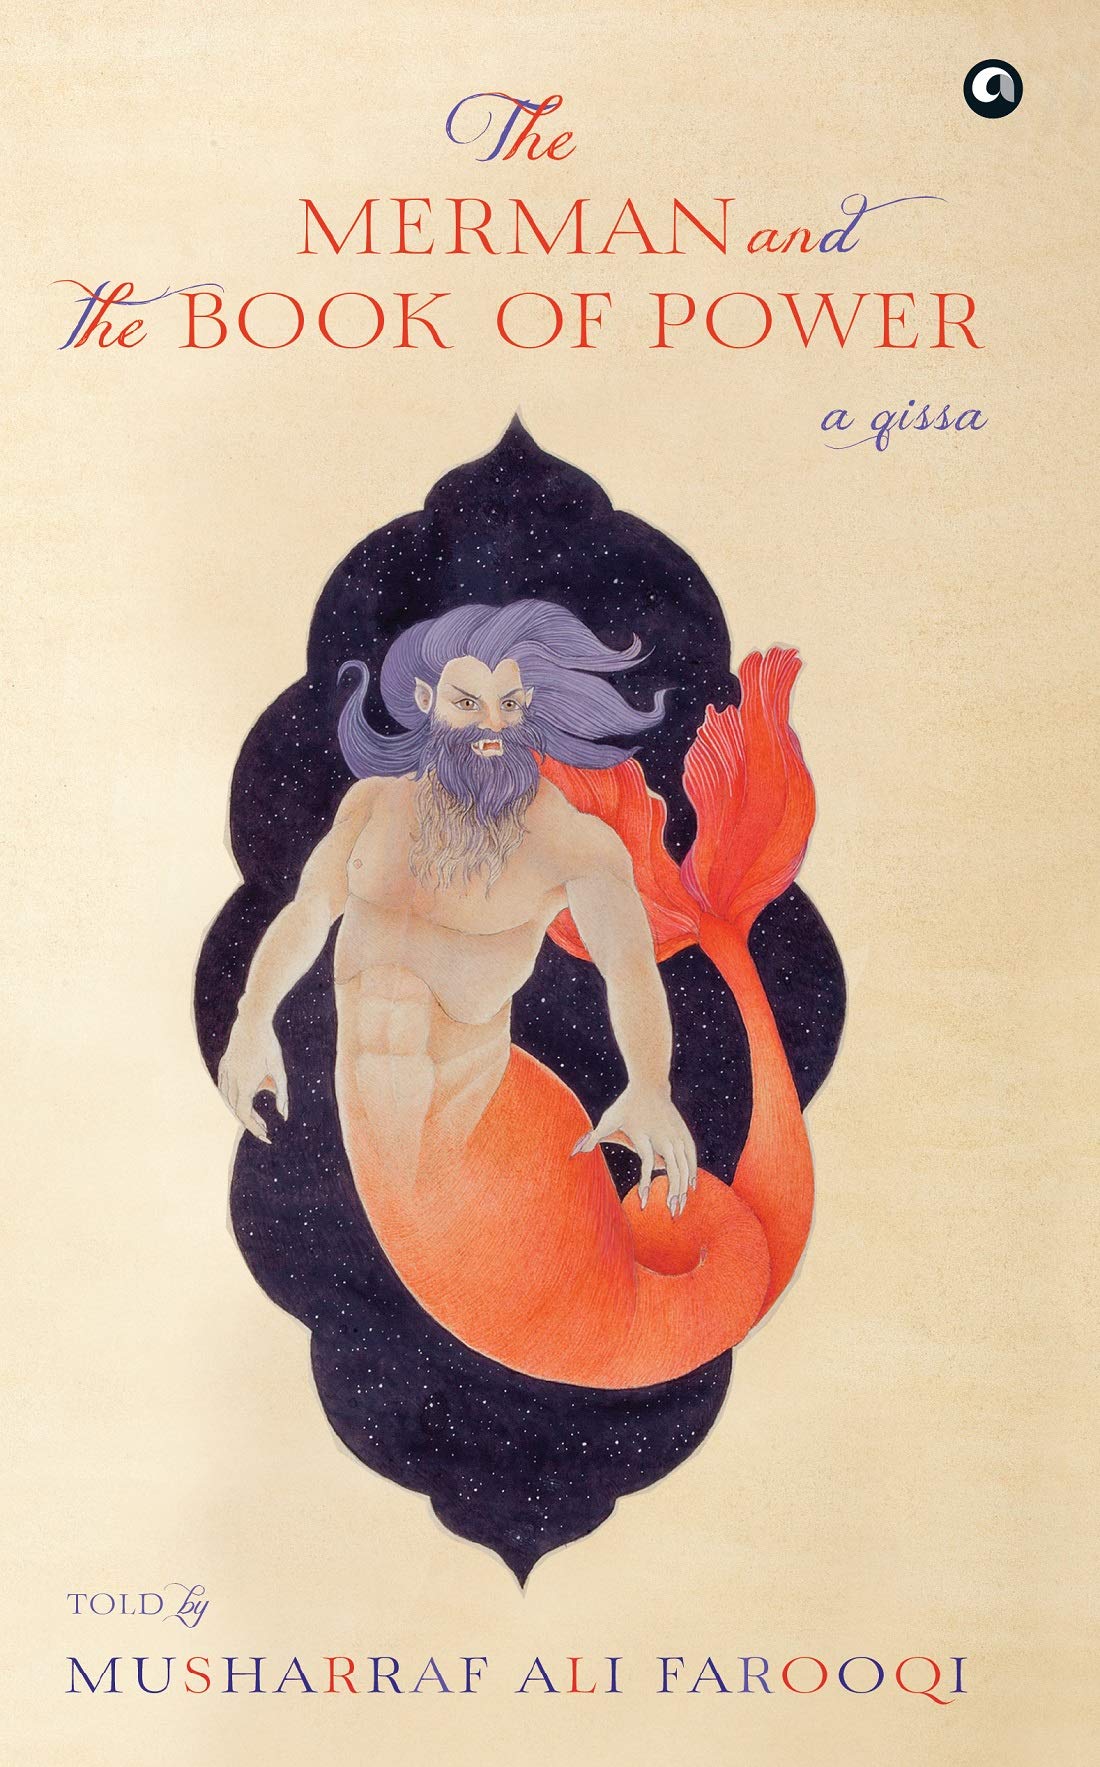 THE MERMAN AND THE BOOK OF POWER